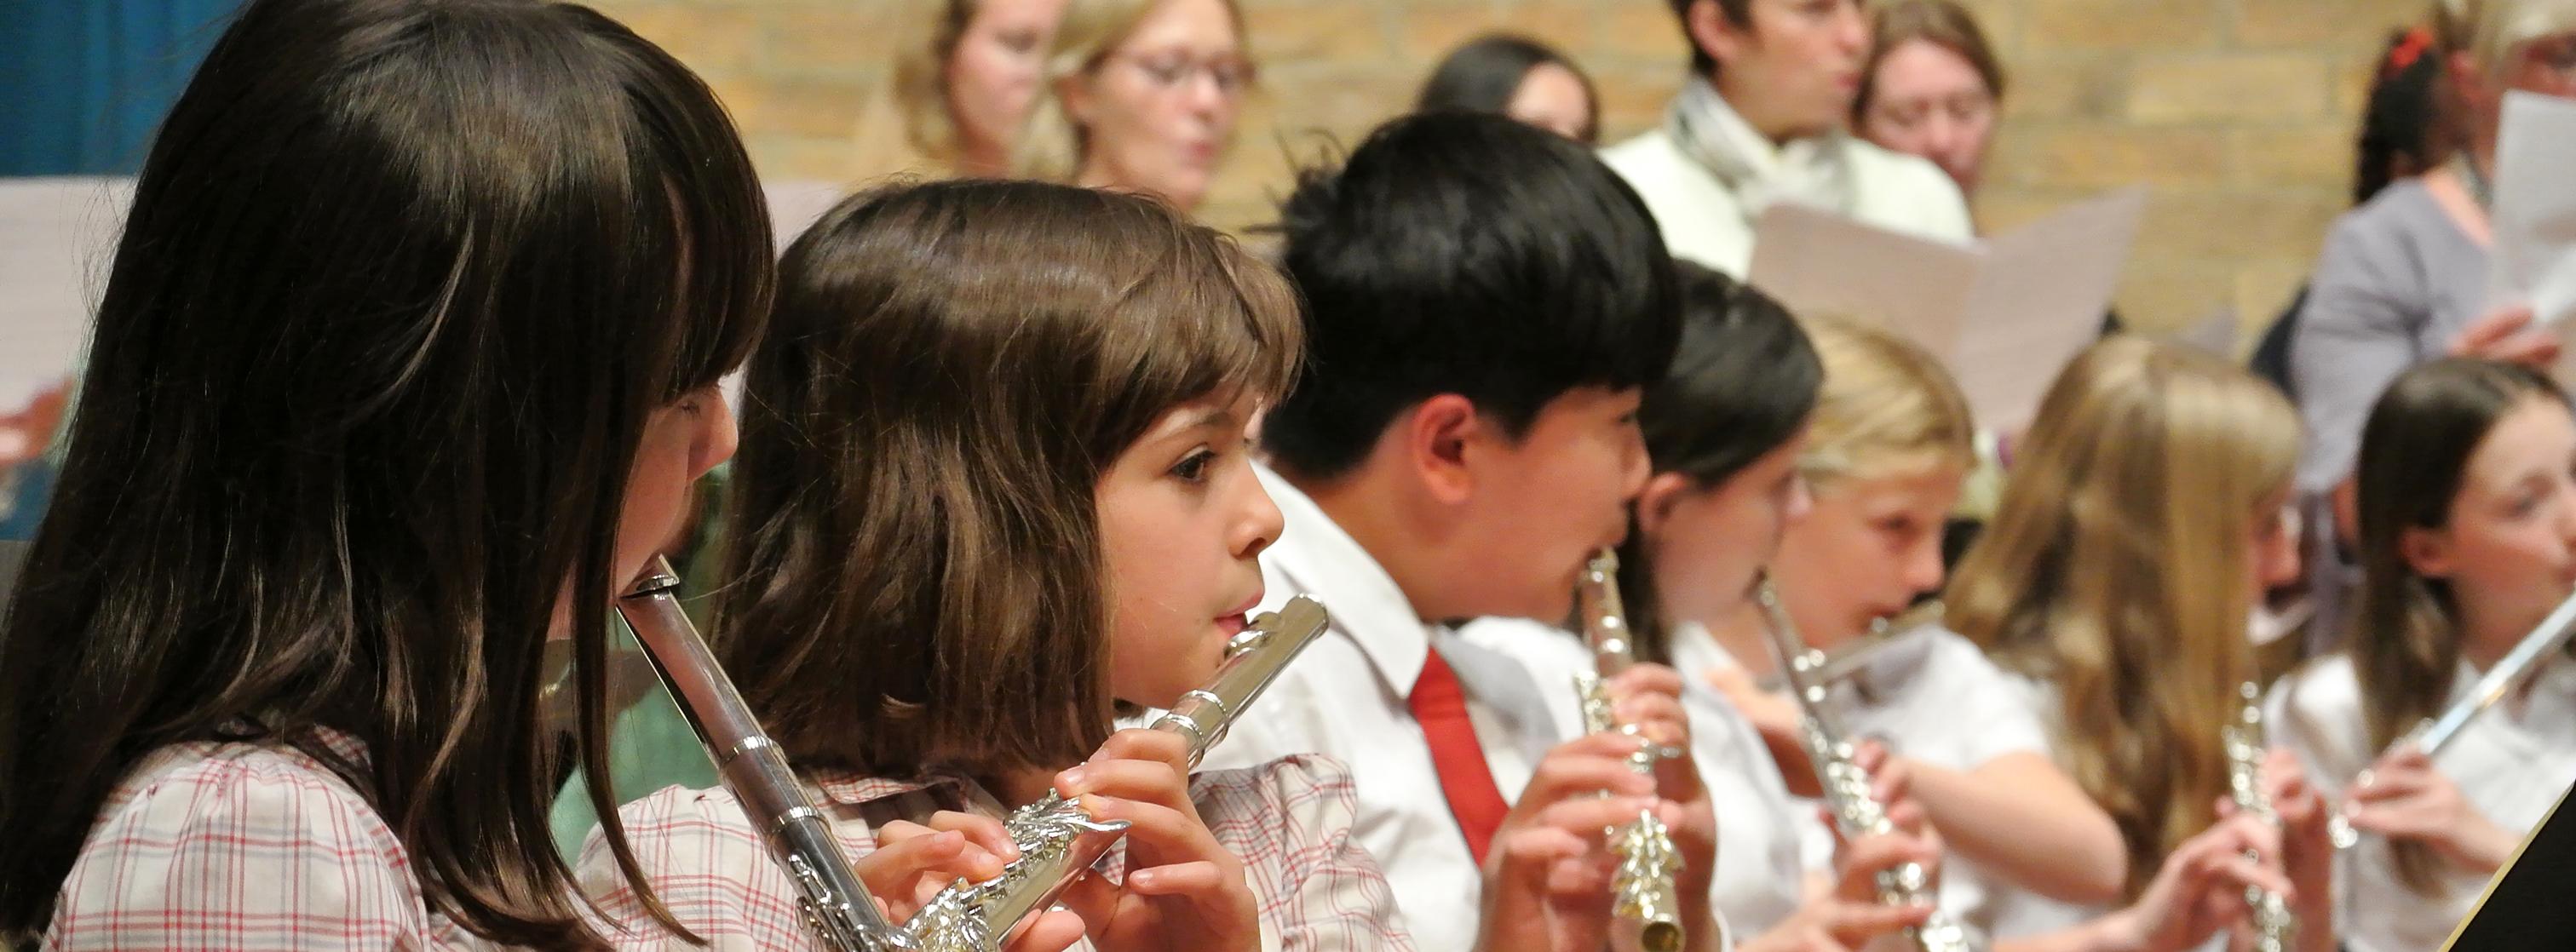 five children playing the flute in a concert